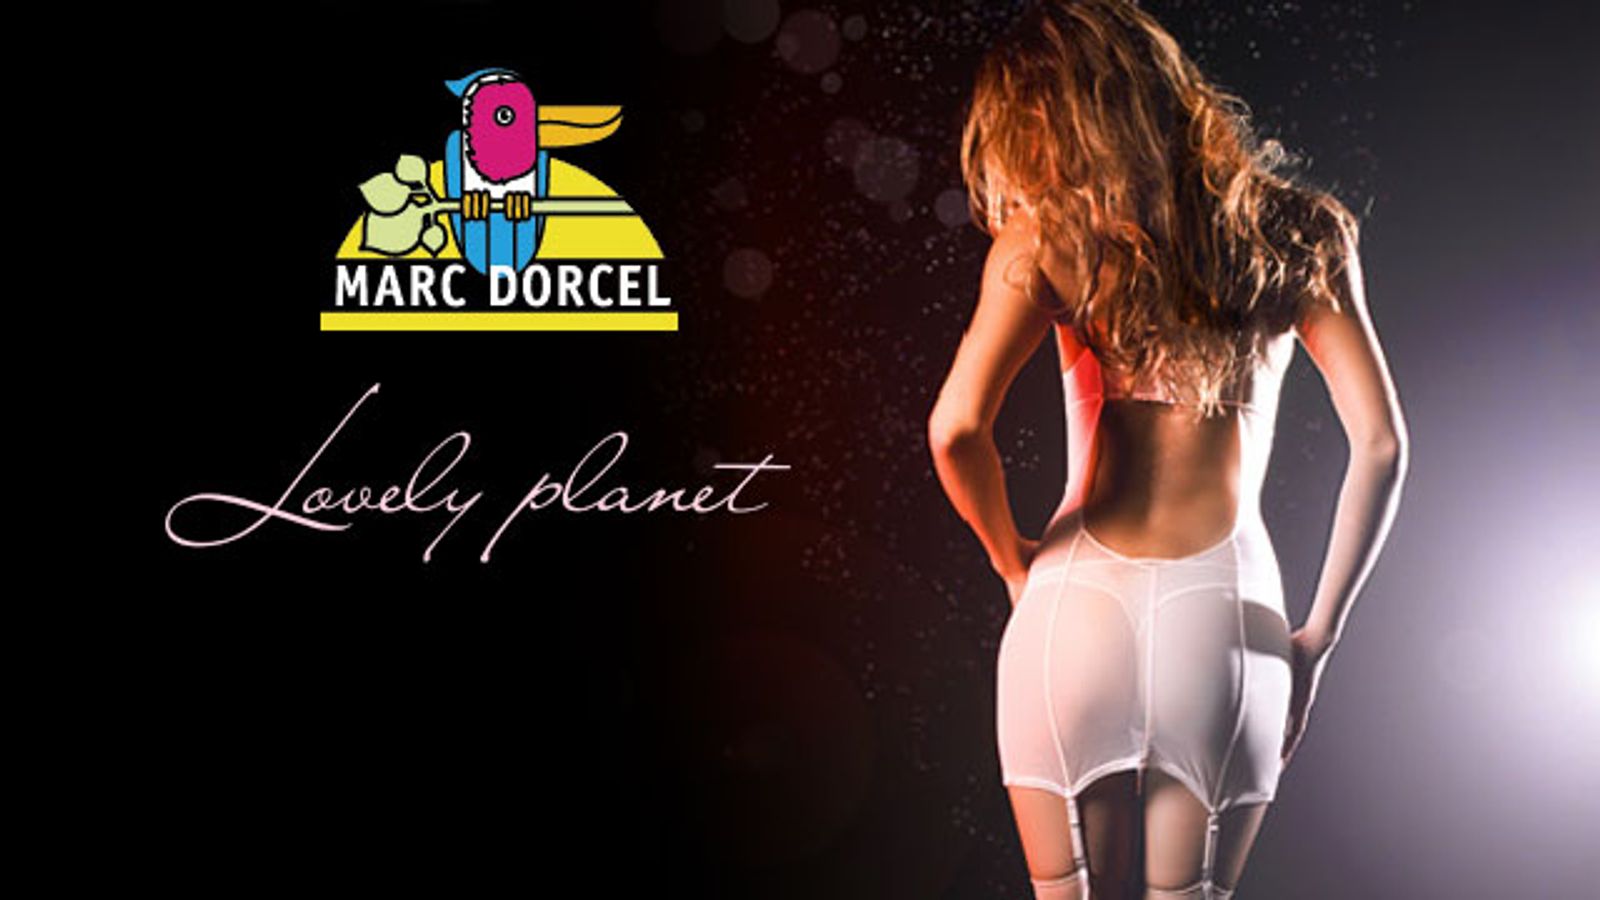 Marc Dorcel Teams With Lovely Planet to Launch Toy Line